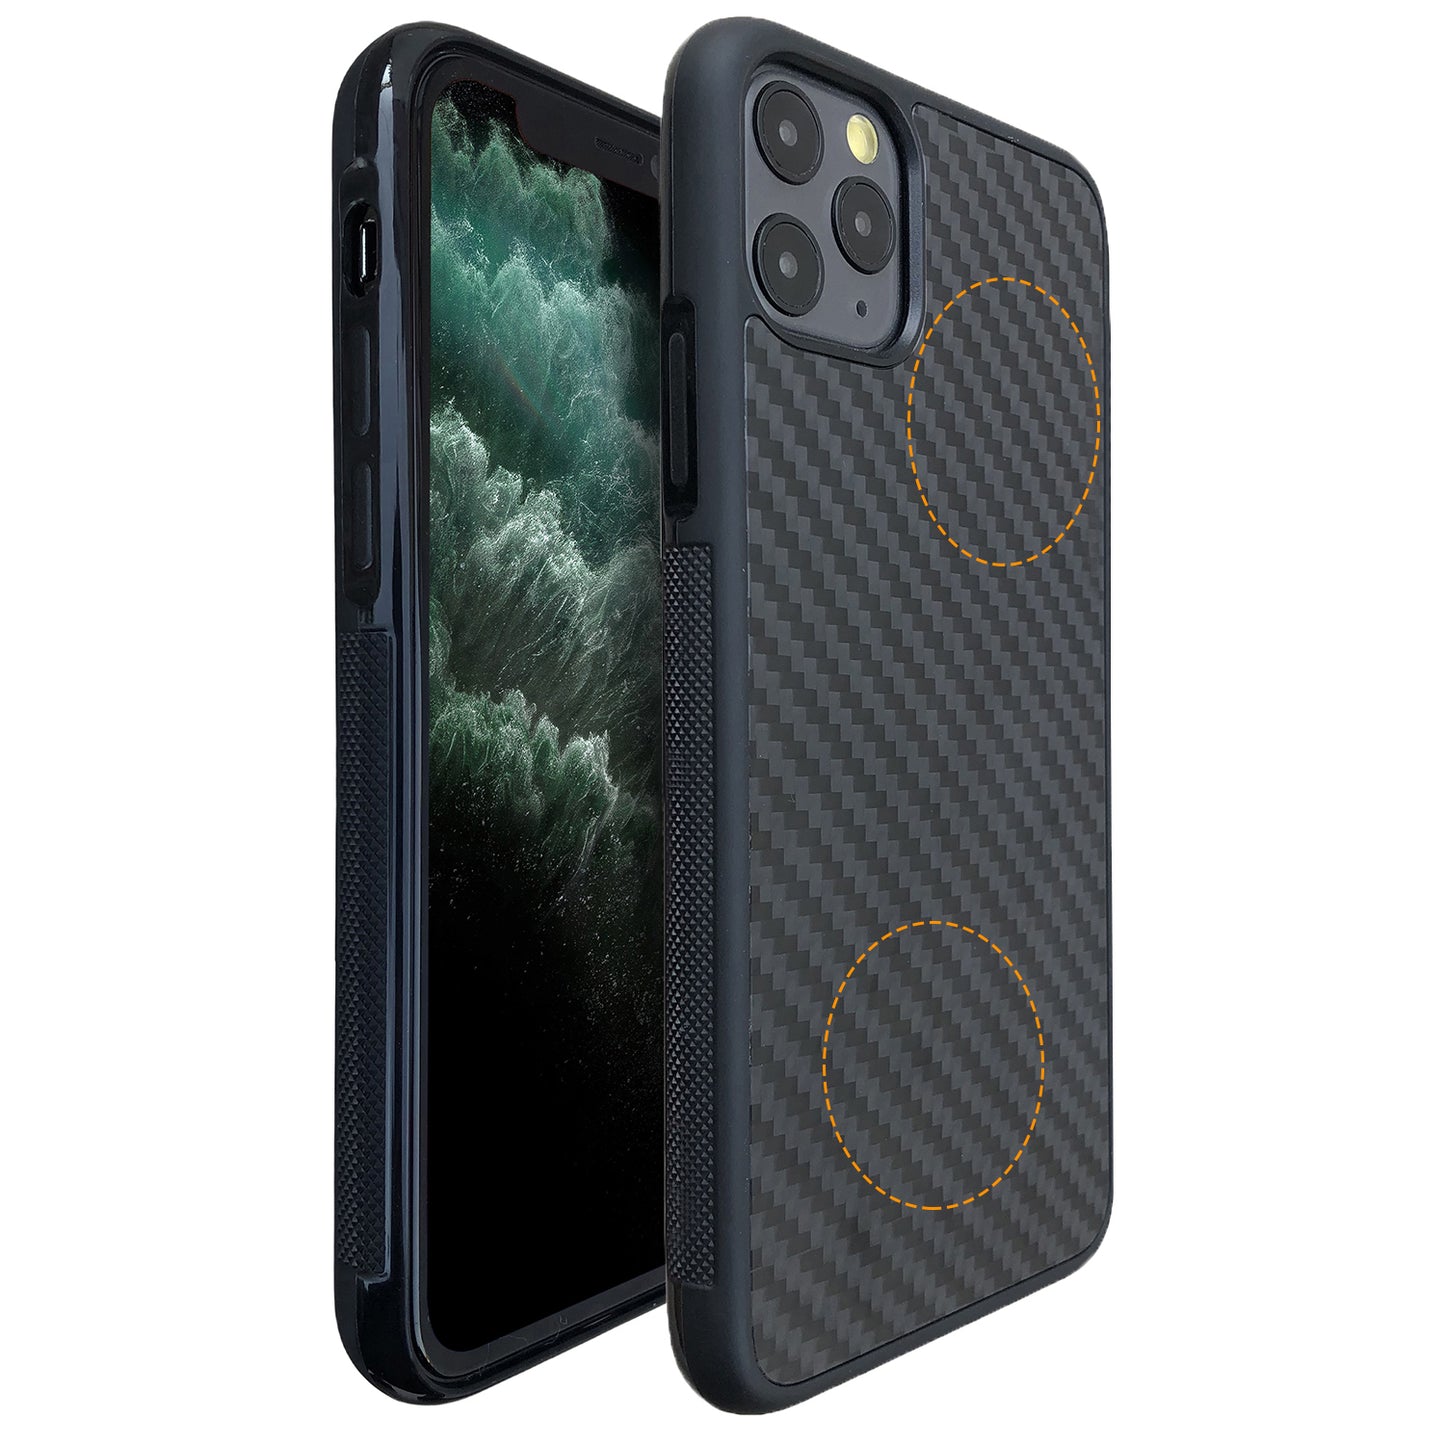 Molzar Grip Series iPhone 11 Pro Max Case with Real Weave Carbon Fiber